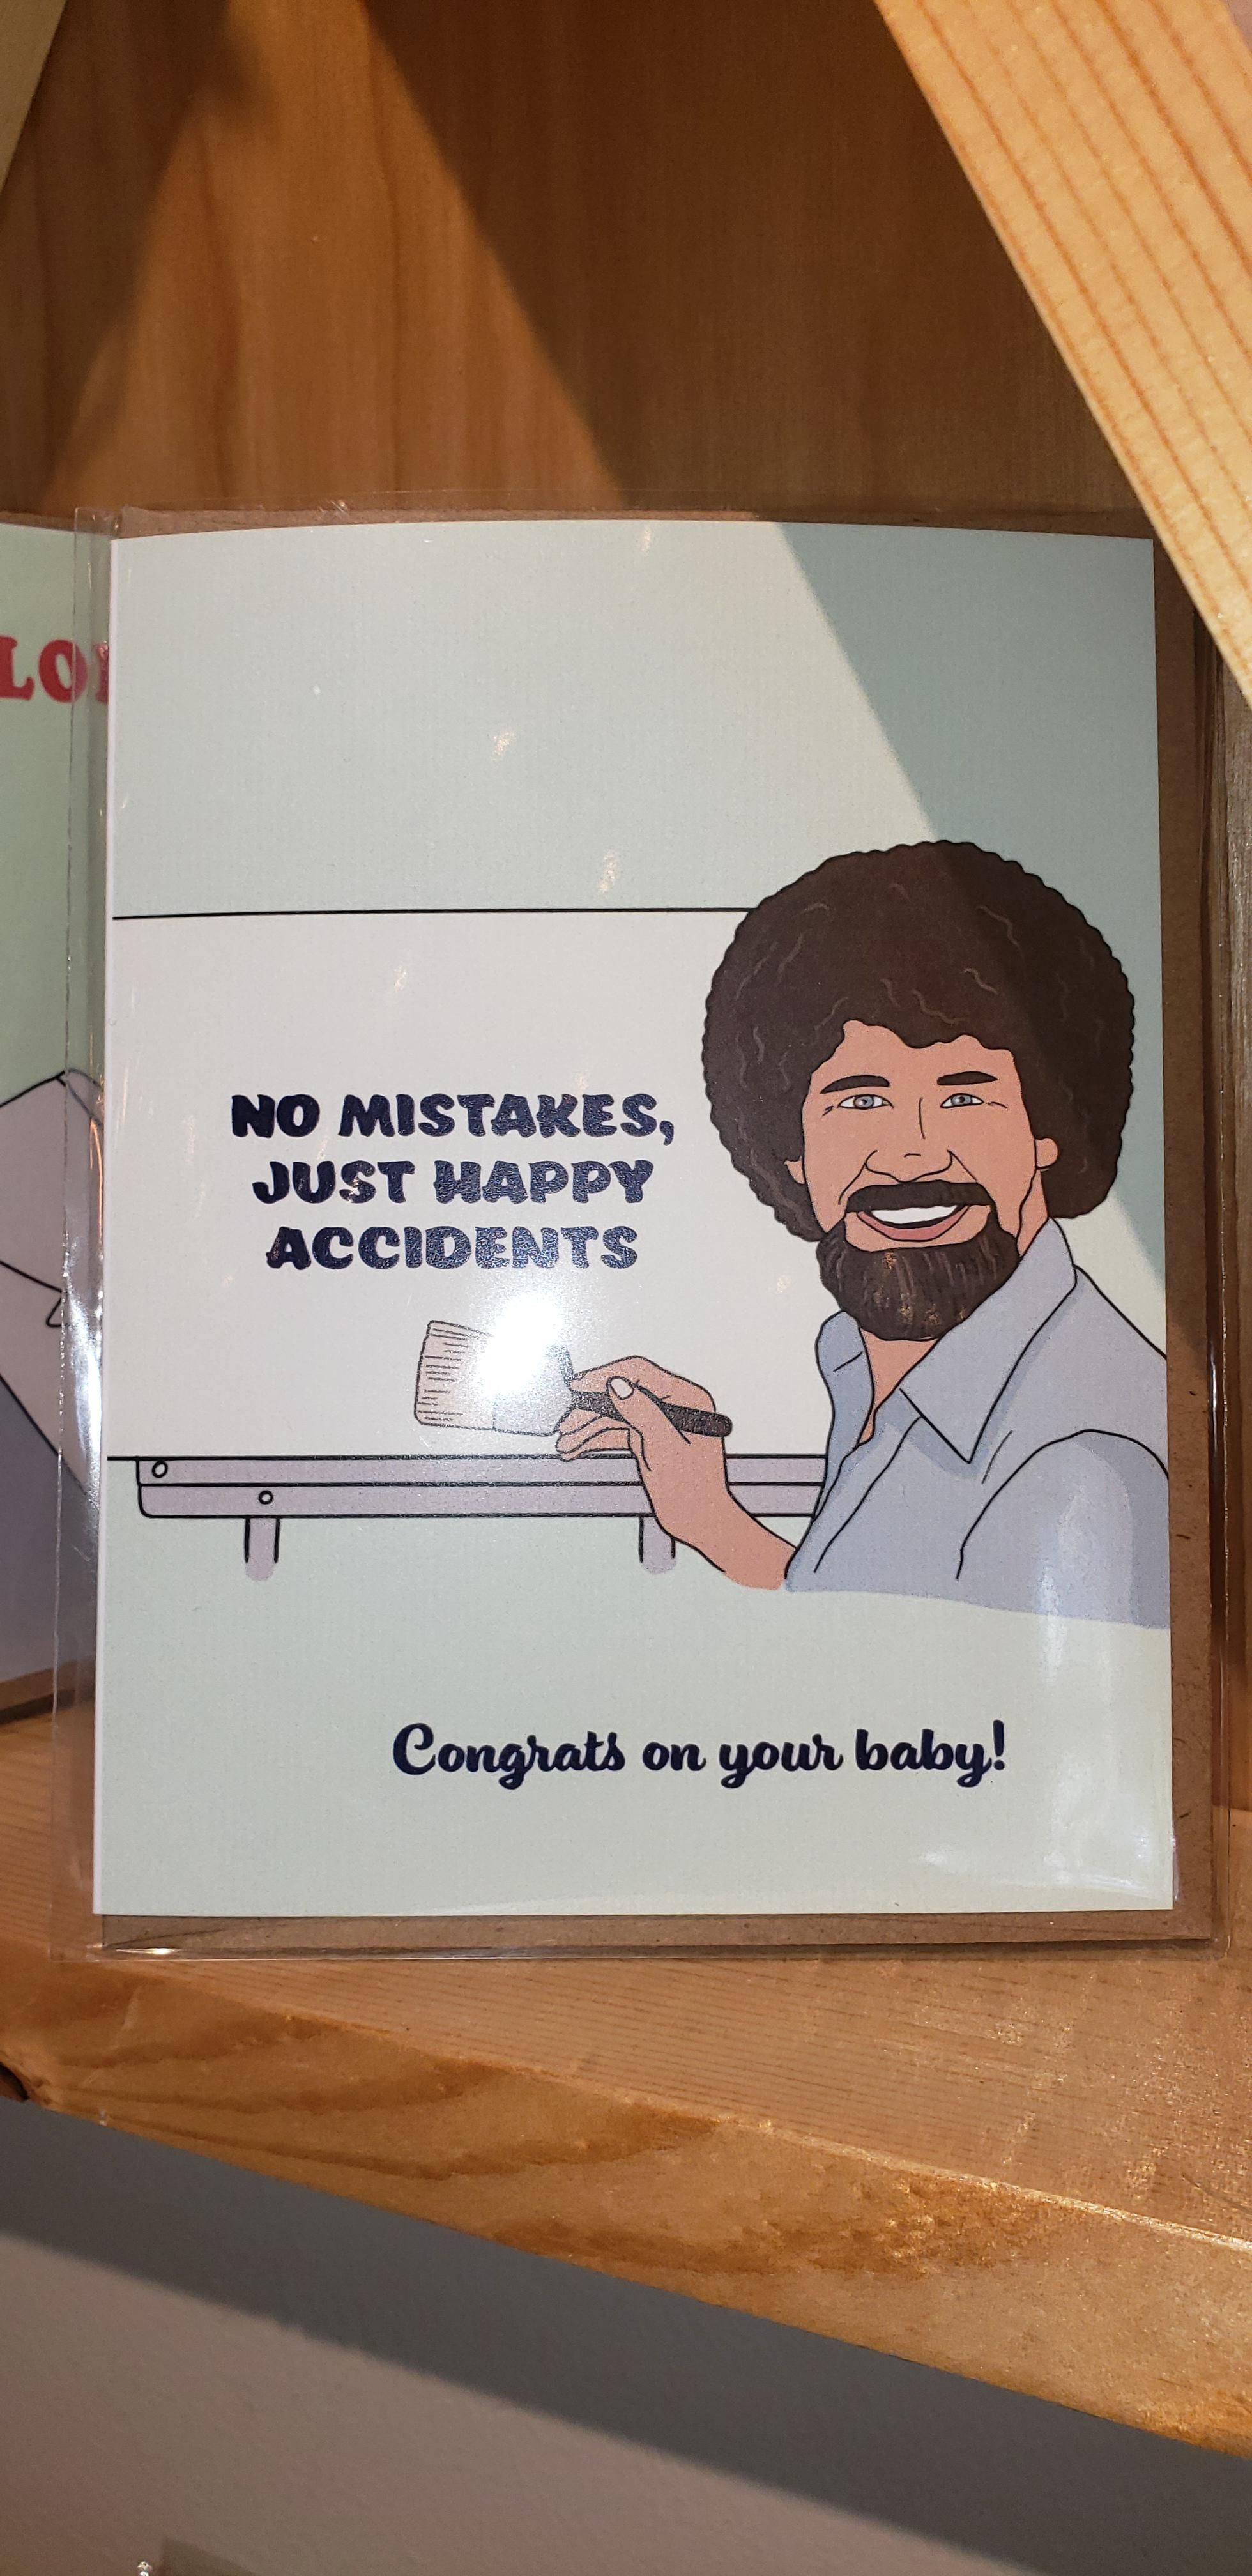 Saw this card in a shop today.